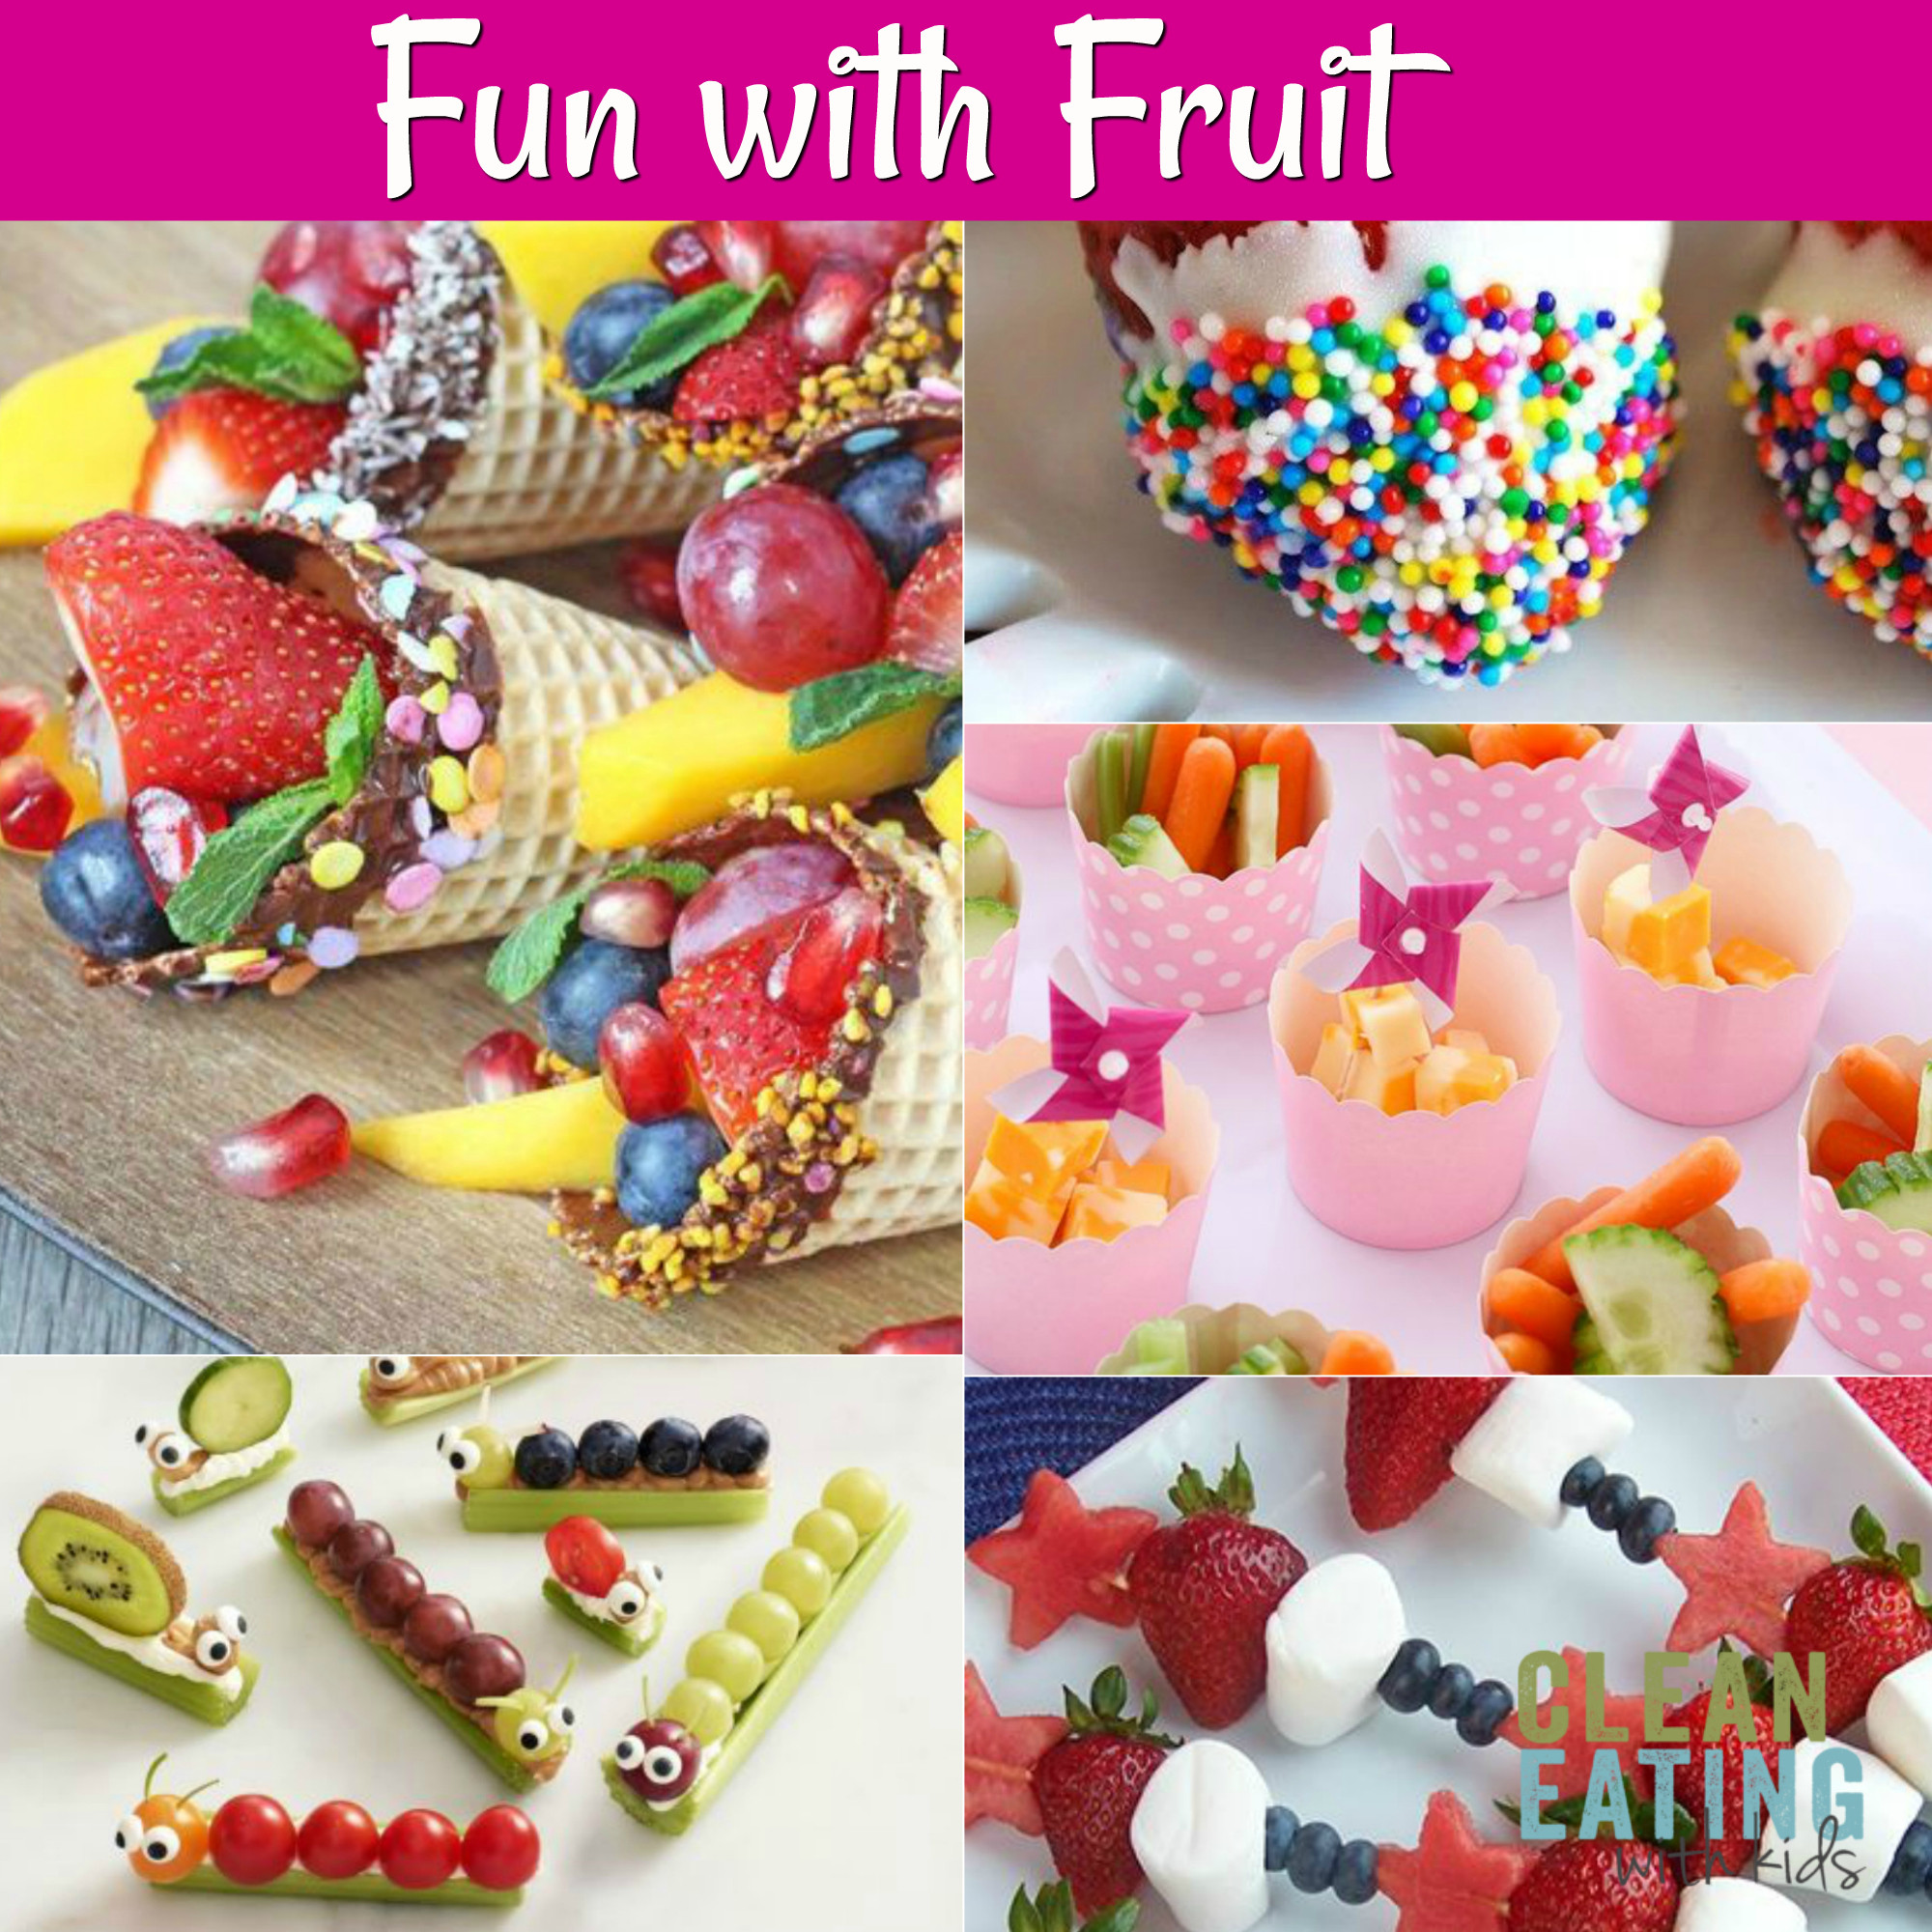 Kids Bday Party Snacks
 25 Healthy Birthday Party Food Ideas Clean Eating with kids